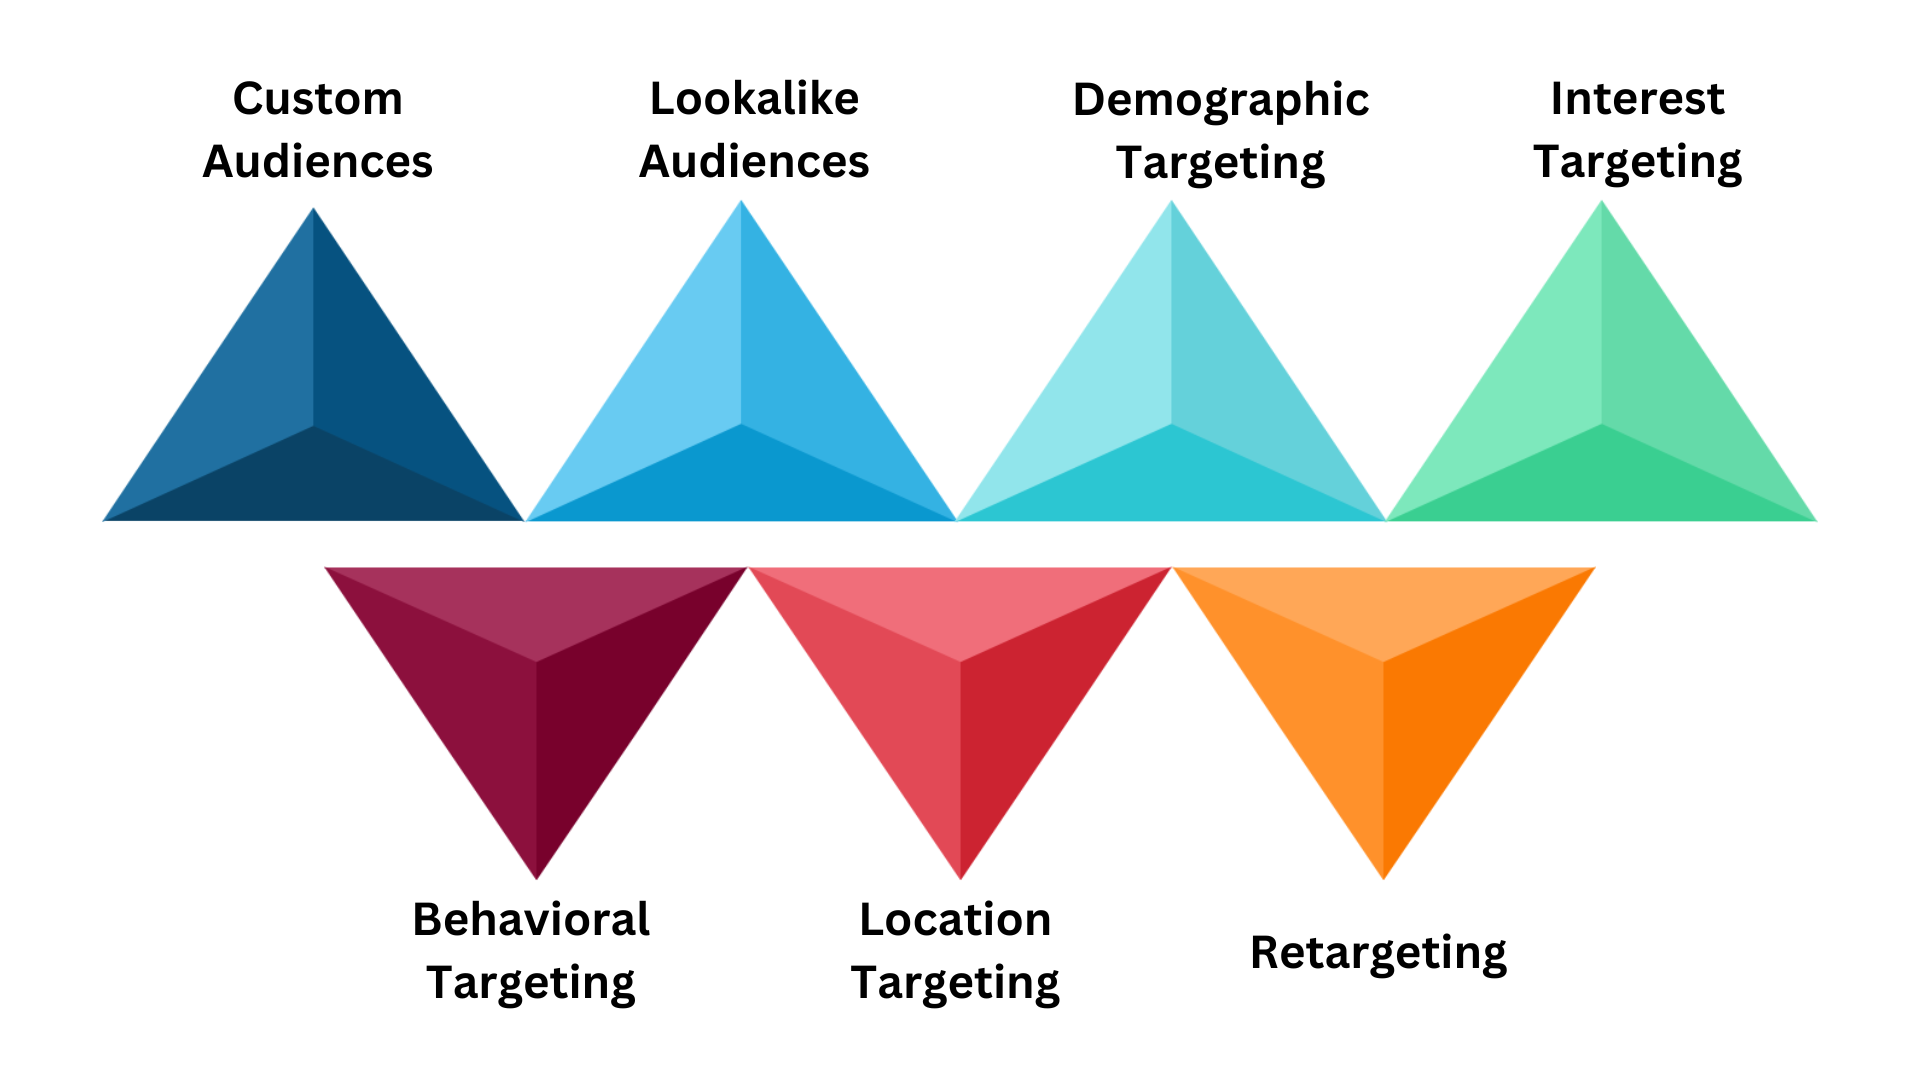 What are the most effective targeting options for Facebook ads that convert